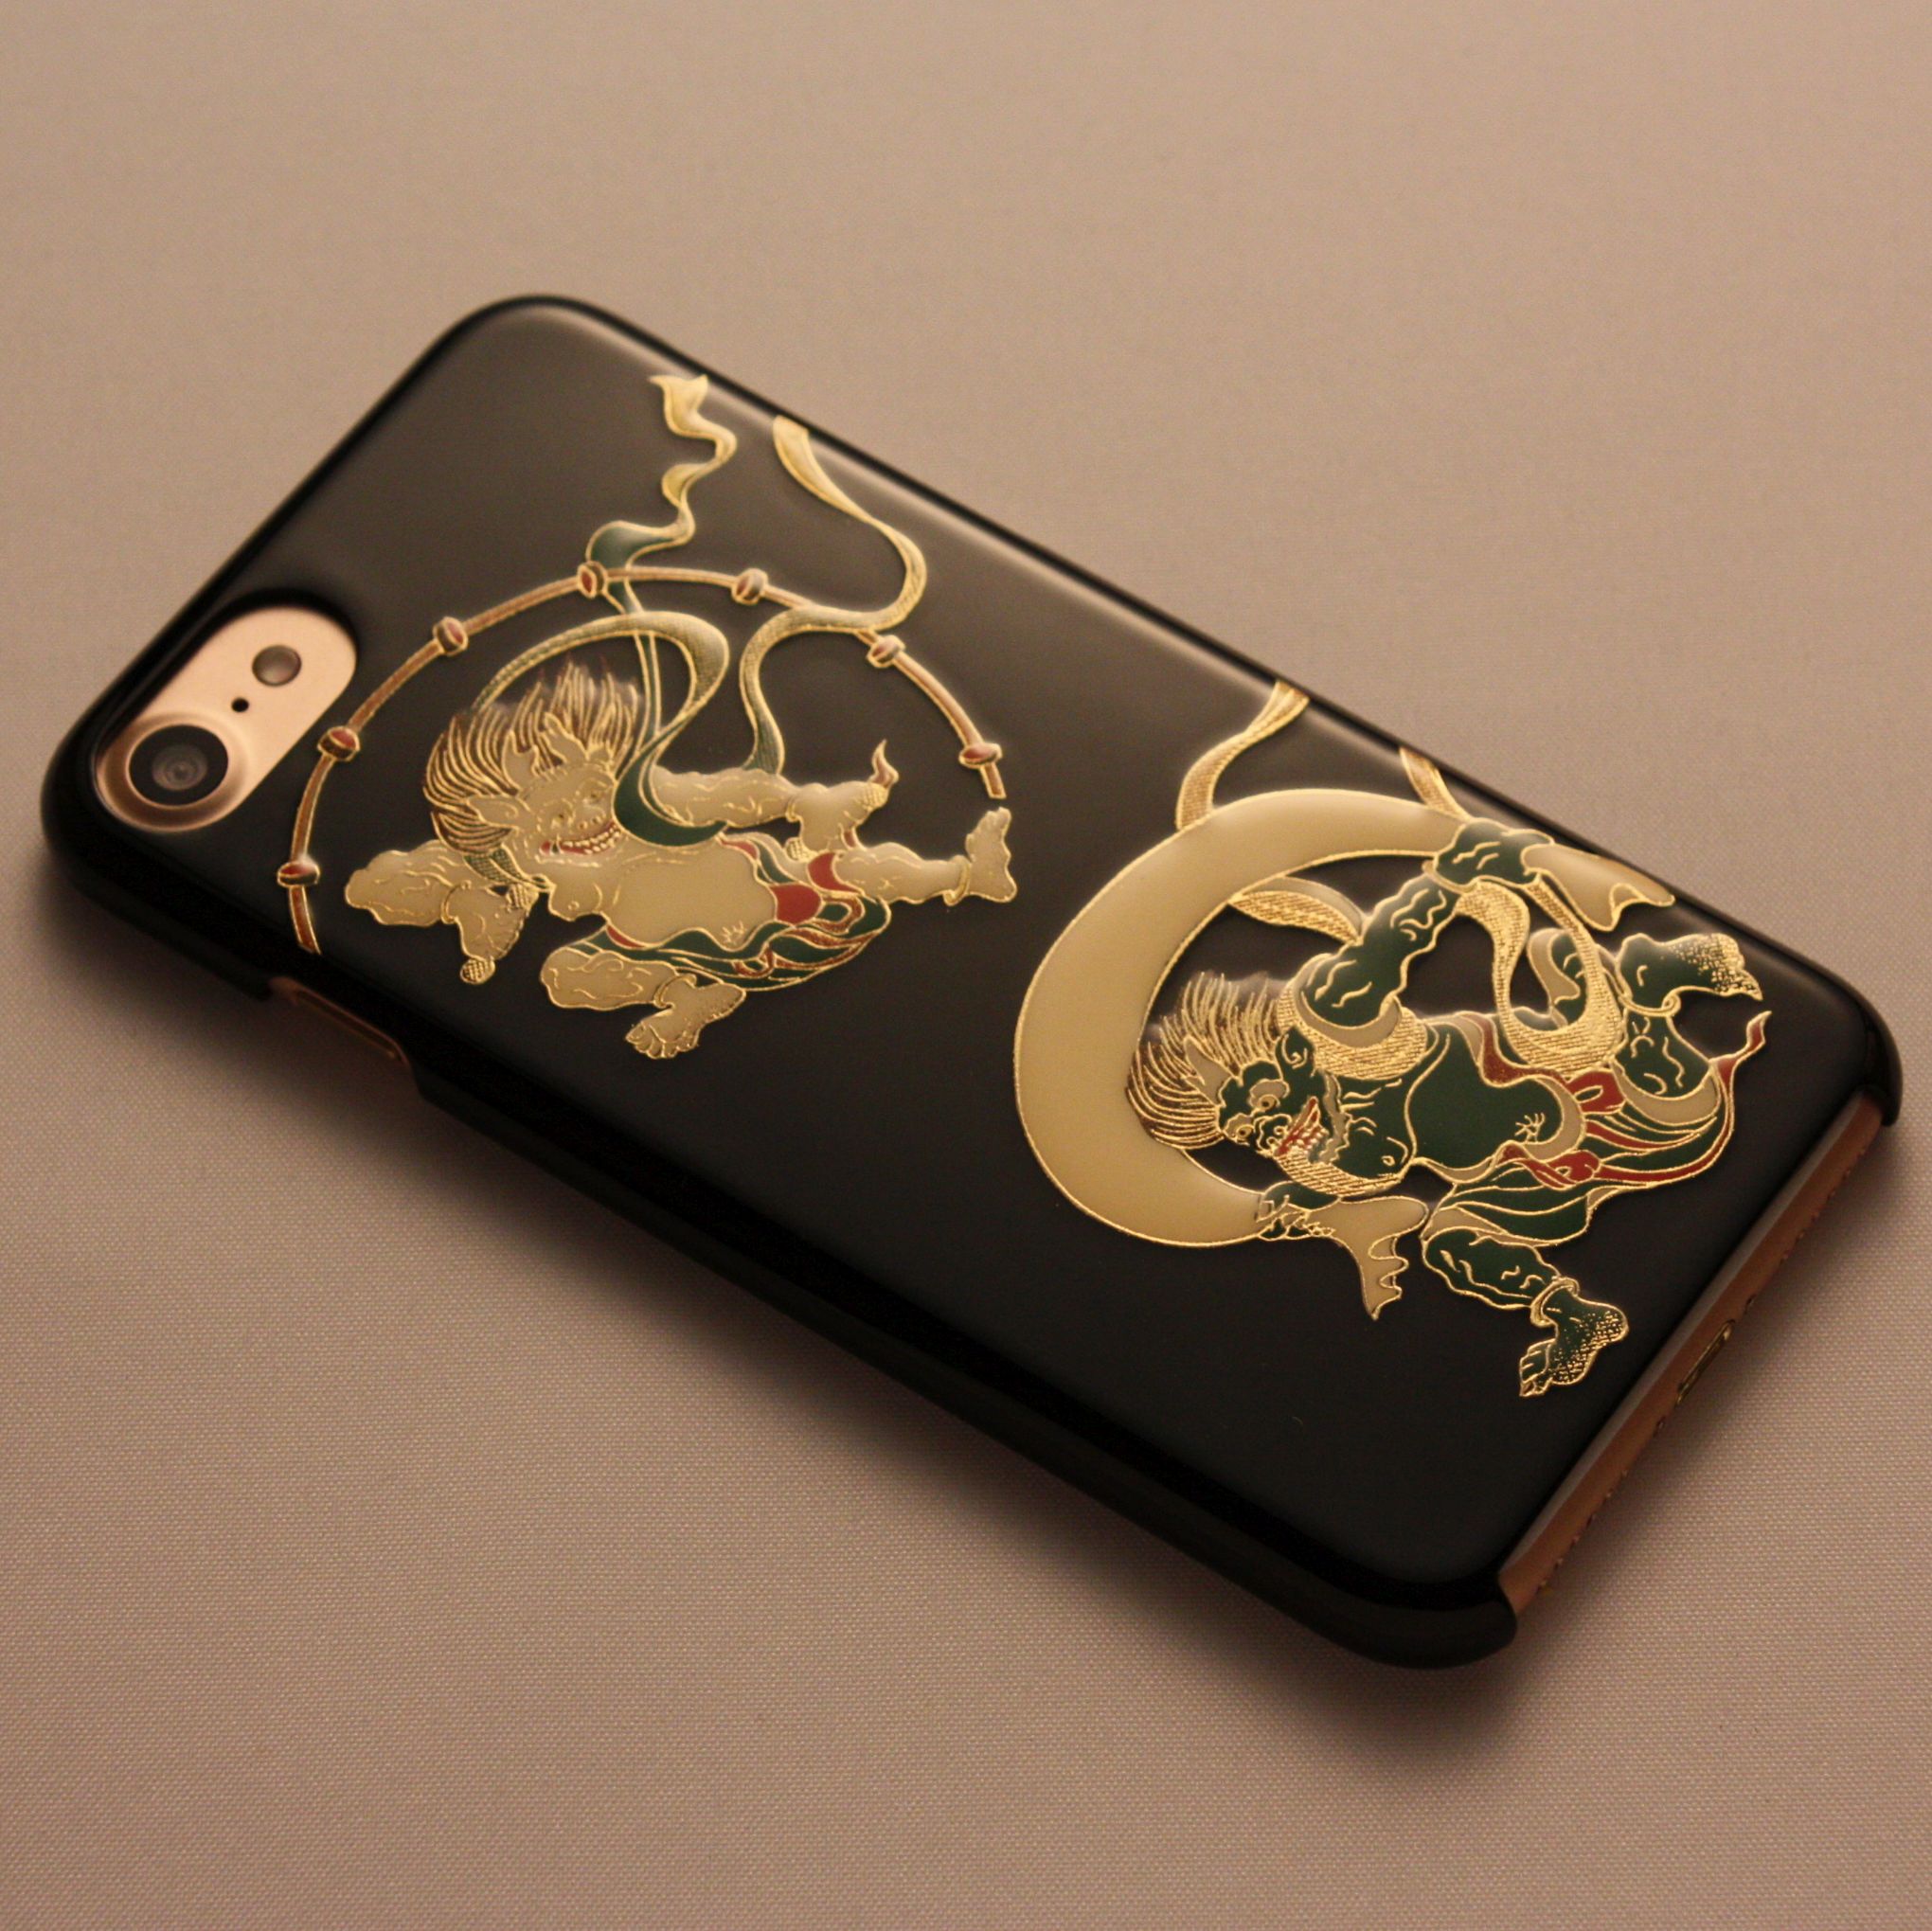 ◆◇◆ iPhone cases SE (2nd generation) ◆◇◆